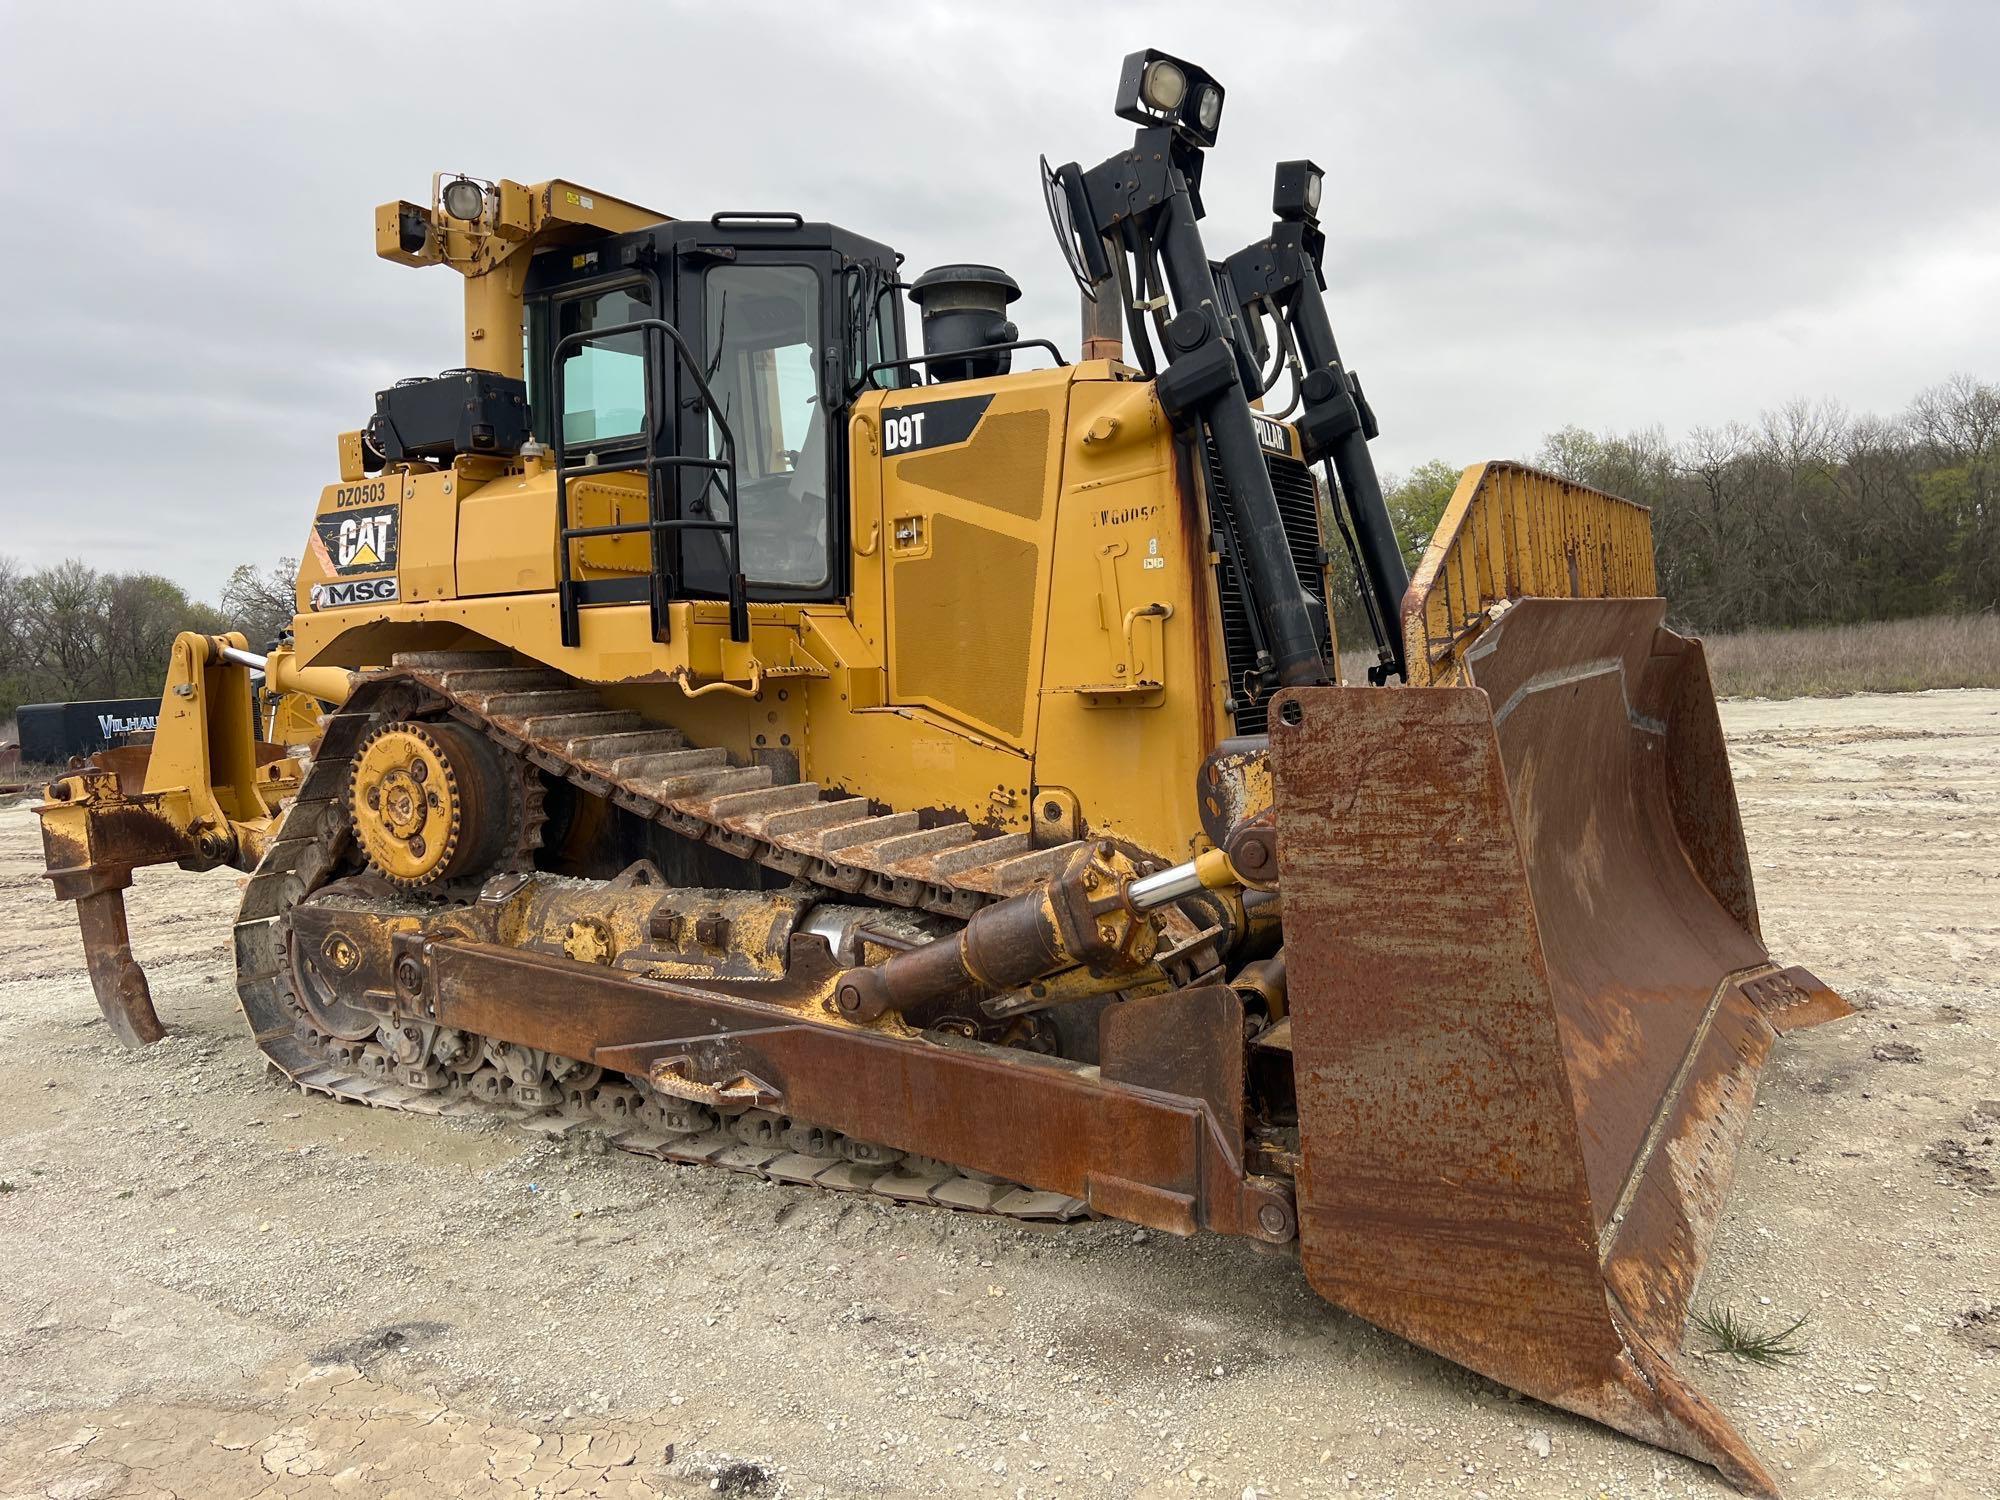 2013 CAT D9T CRAWLER TRACTOR SN:0TWG00503 powered by Cat diesel engine, equipped with EROPS, air,